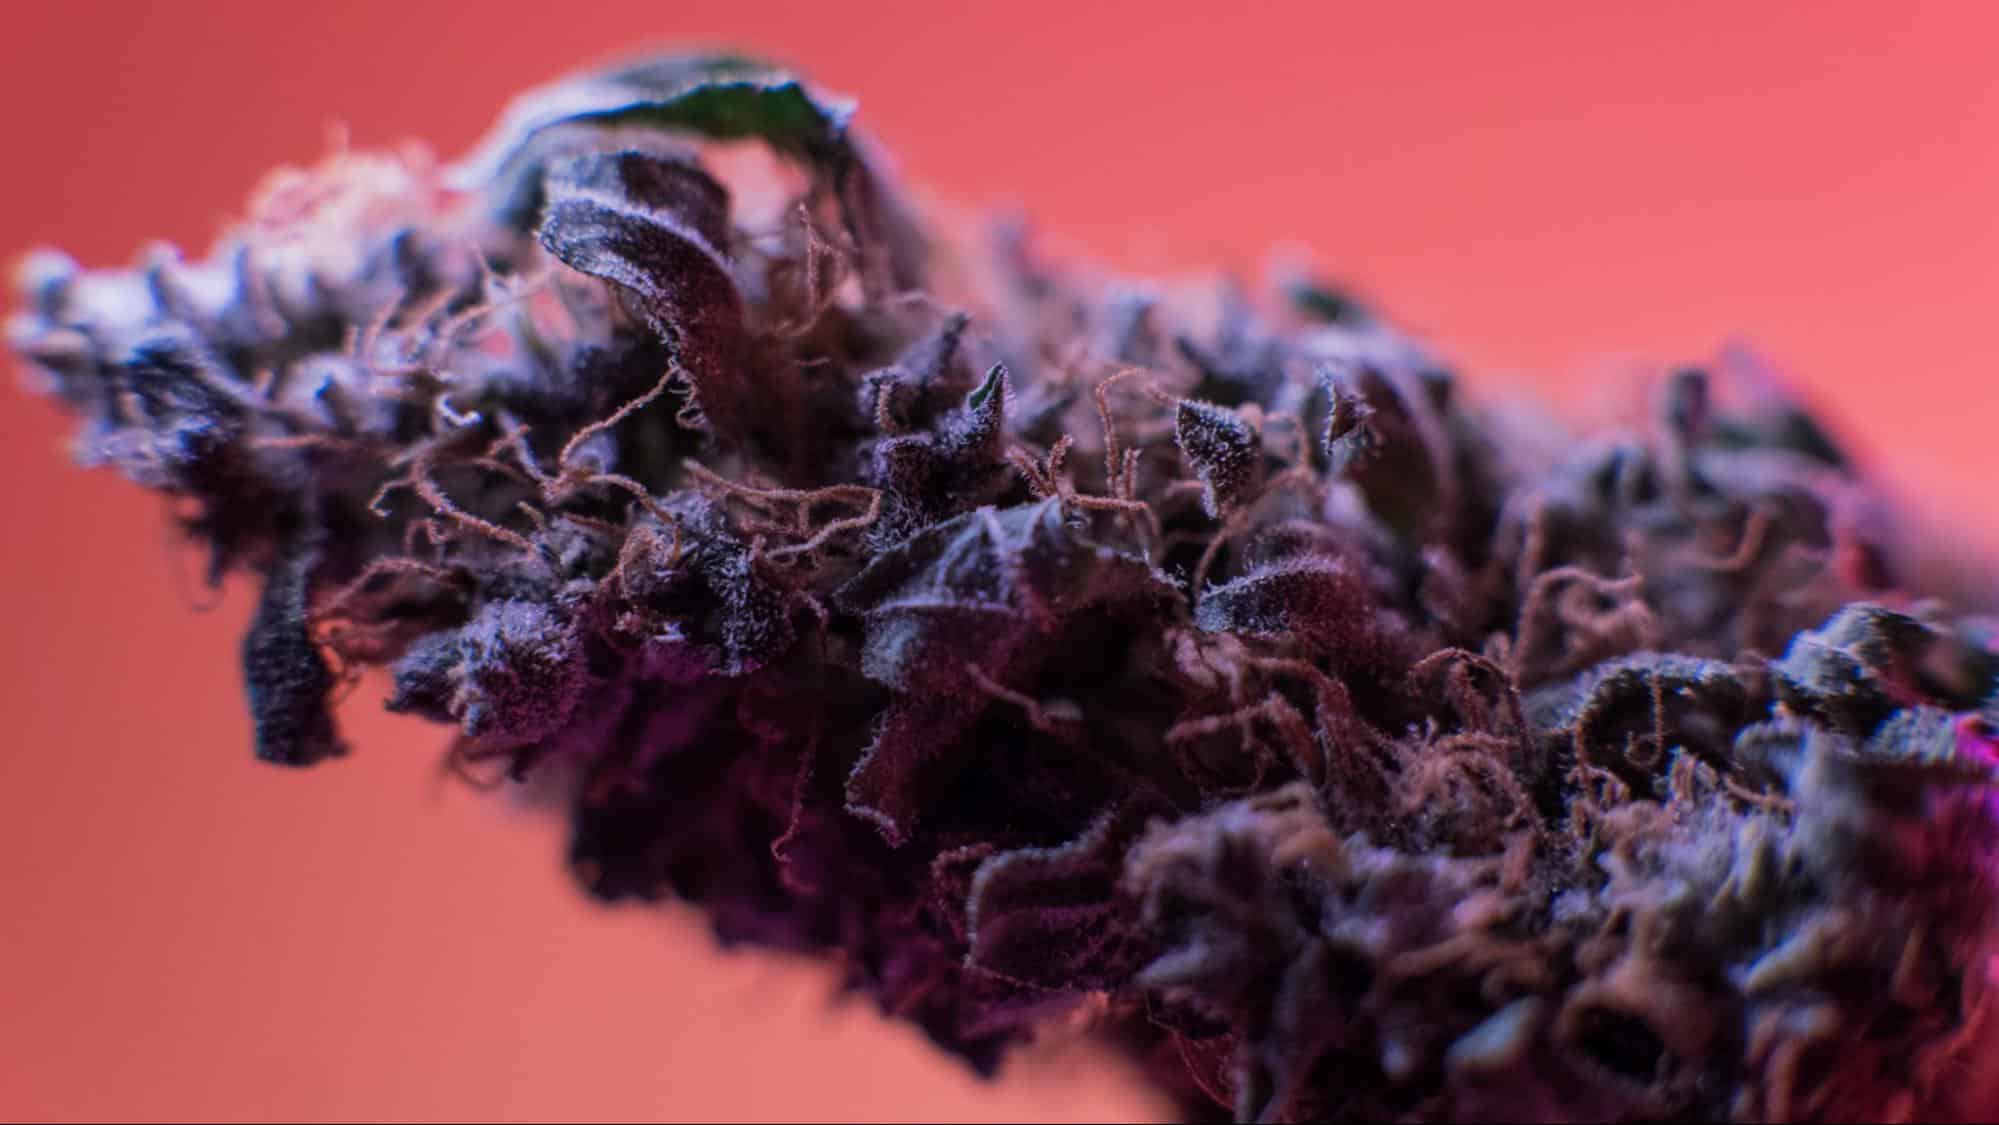 Exquisite buds of exotic purple strains of cannabis showcased against a light red background, underlining the unique and lush coloration of these premium cannabis varieties